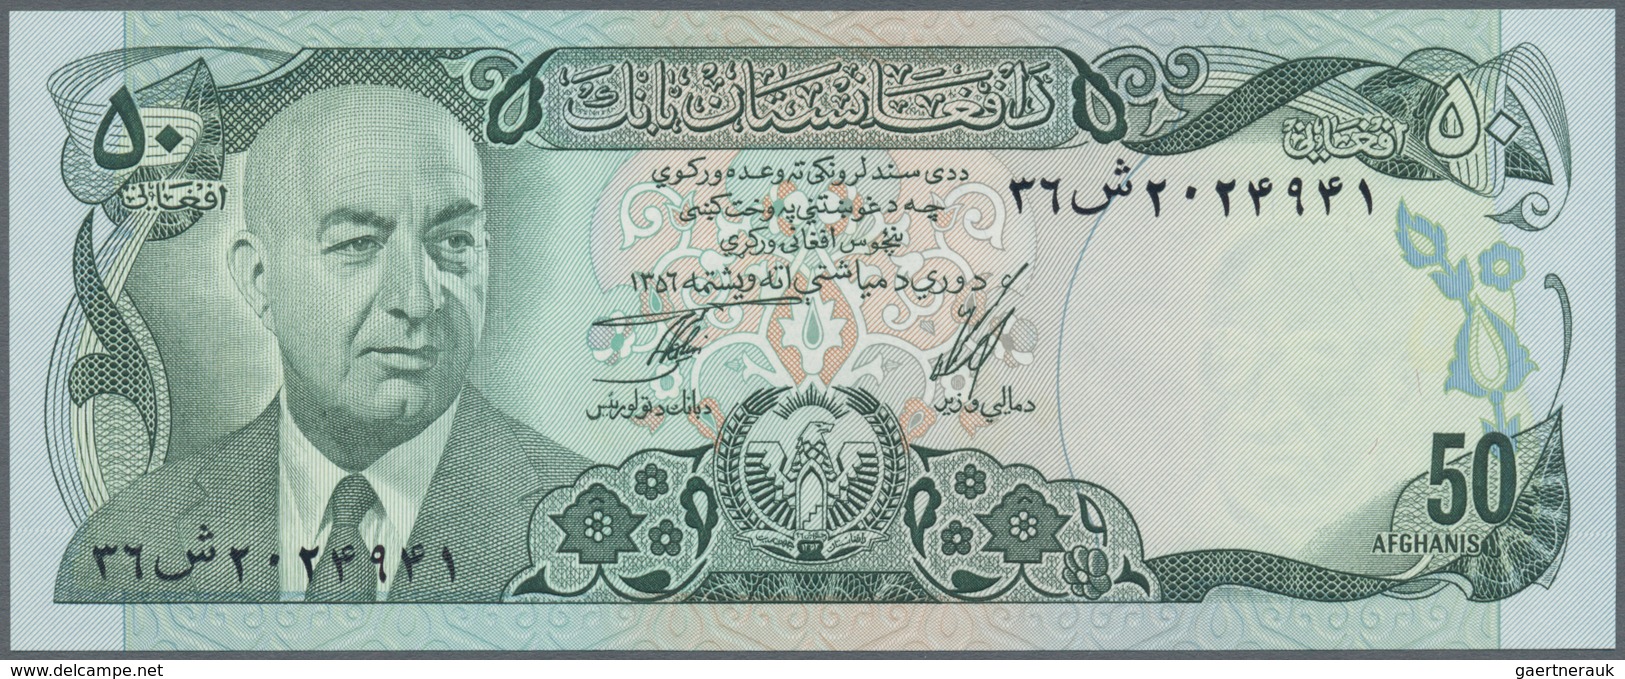 Afghanistan: set of 18 banknotes containing the following Pick numbers: 8, 22, 28, 37, 38, 49, 50, 5